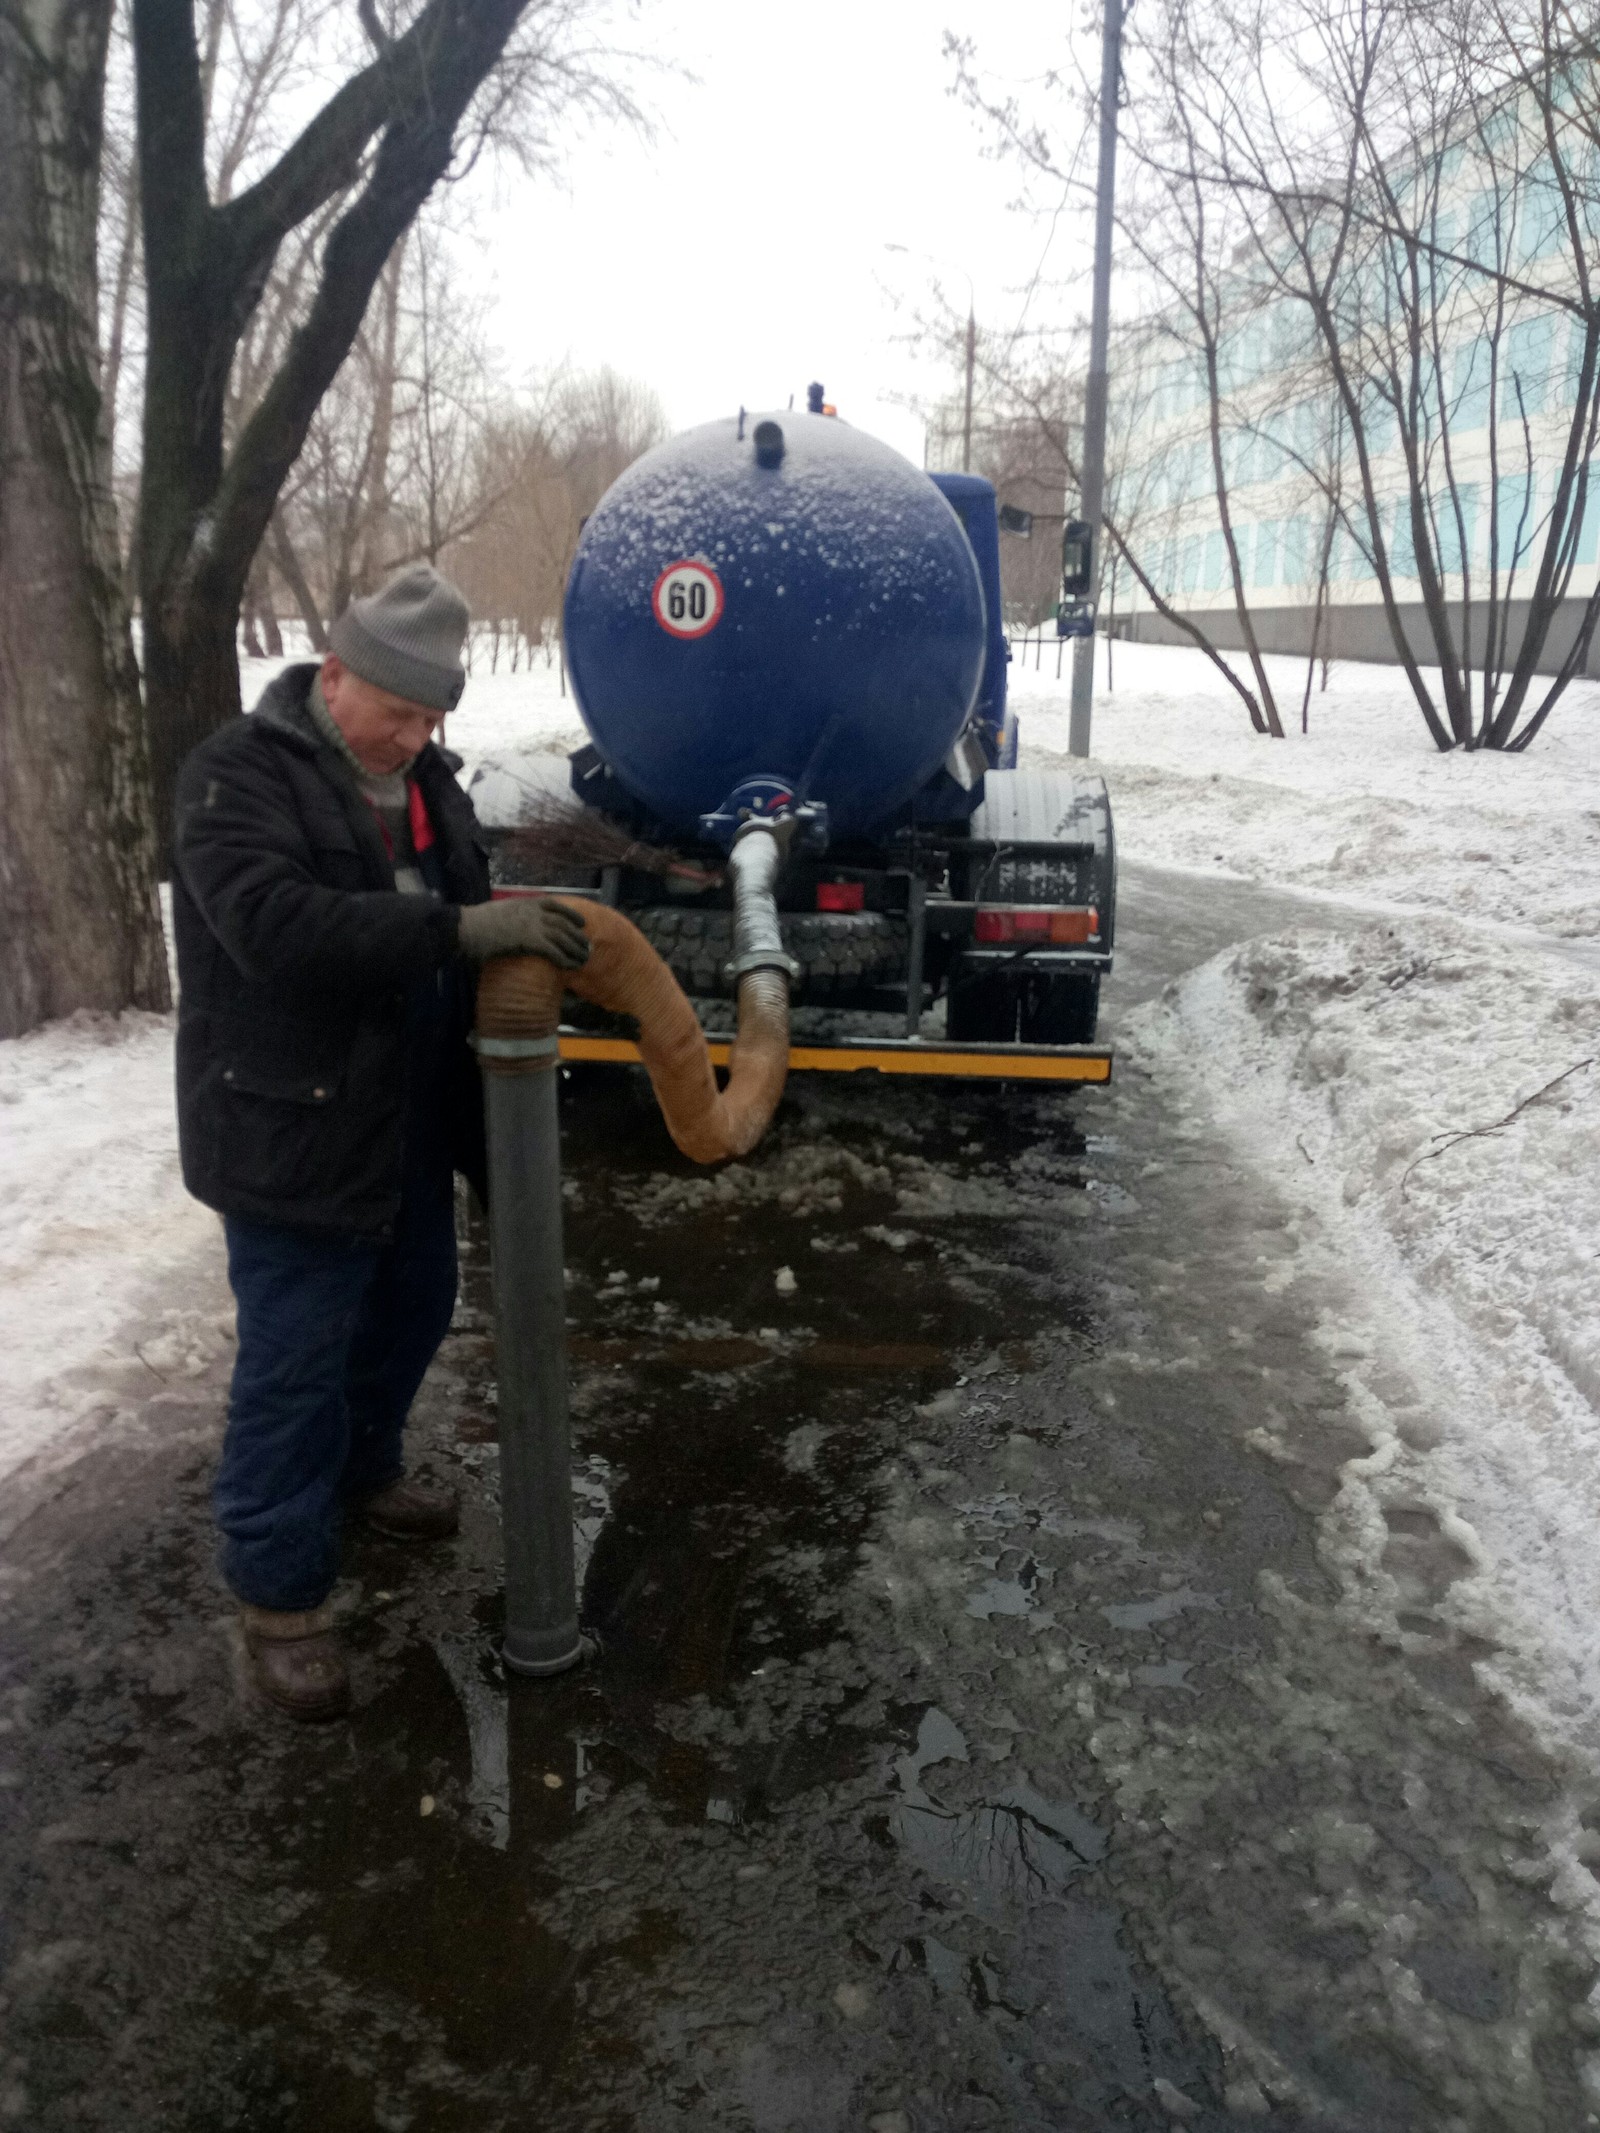 Innovation in action. - My, Moscow, Utility services, Puddle